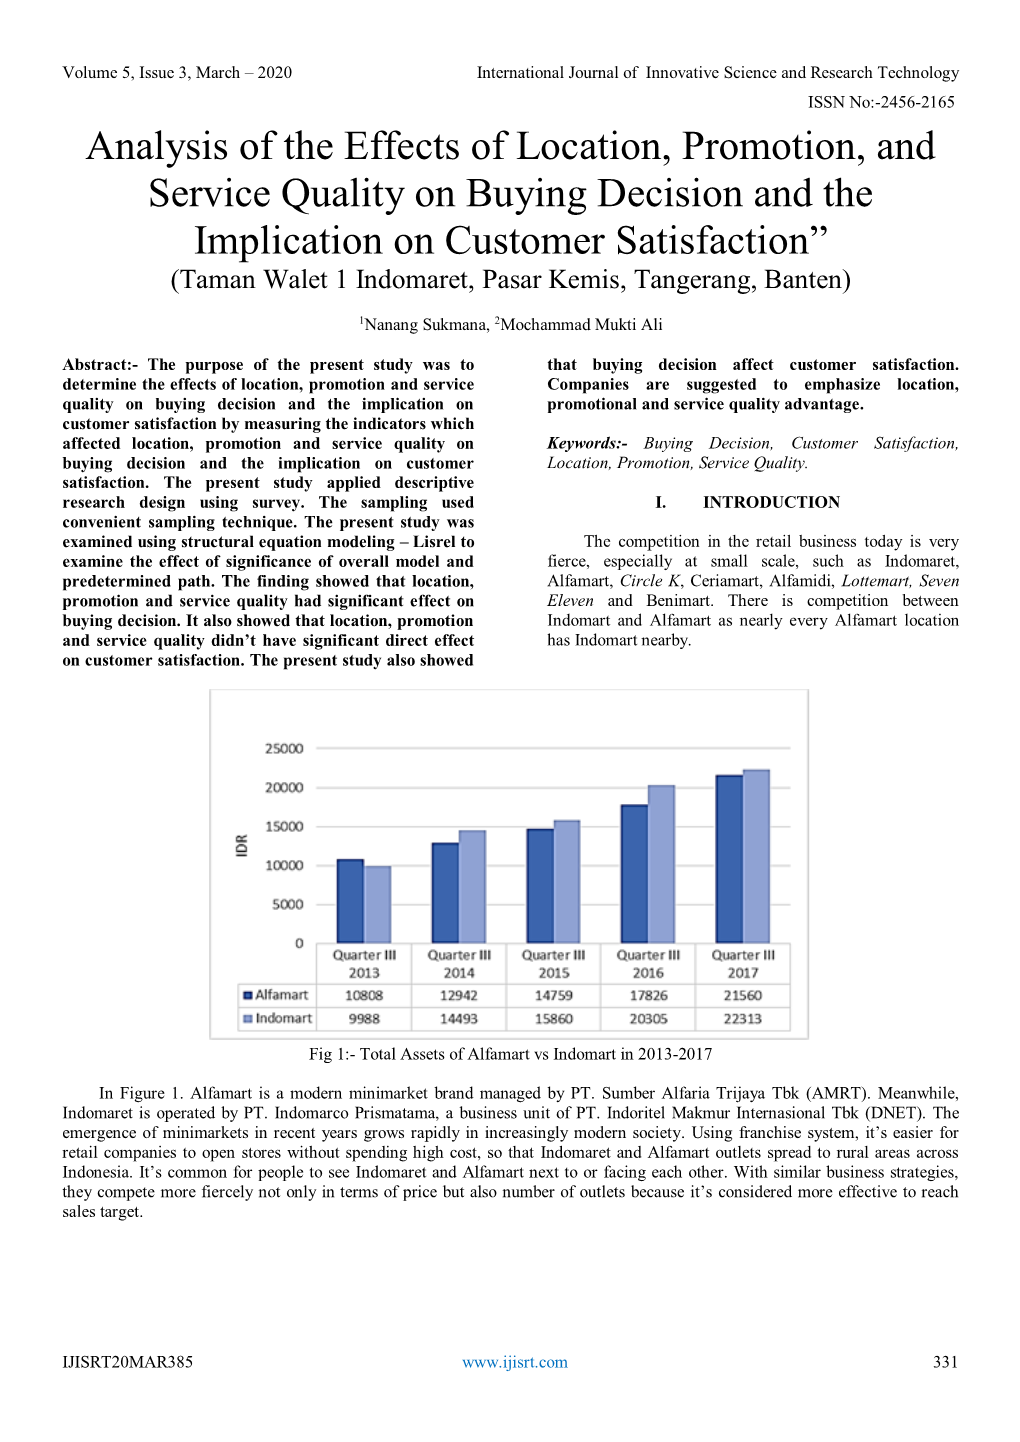 Analysis of the Effects of Location, Promotion, and Service Quality On